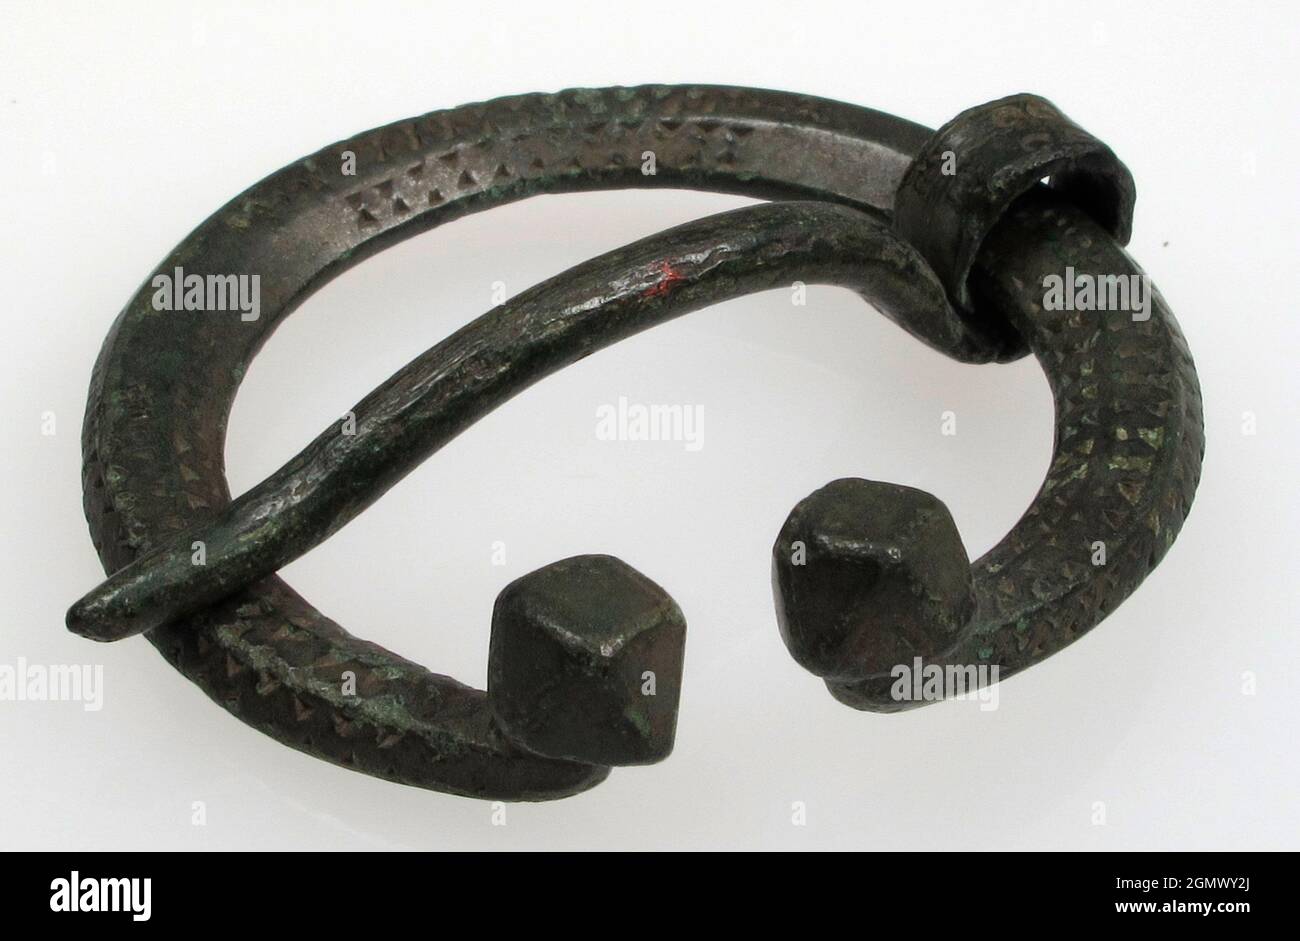 Penannular Brooch. Date: 10th-11th century; Culture: Scandinavian or Baltic; Medium: Copper alloy, cast (loop); tongue wrought copper alloy; Stock Photo